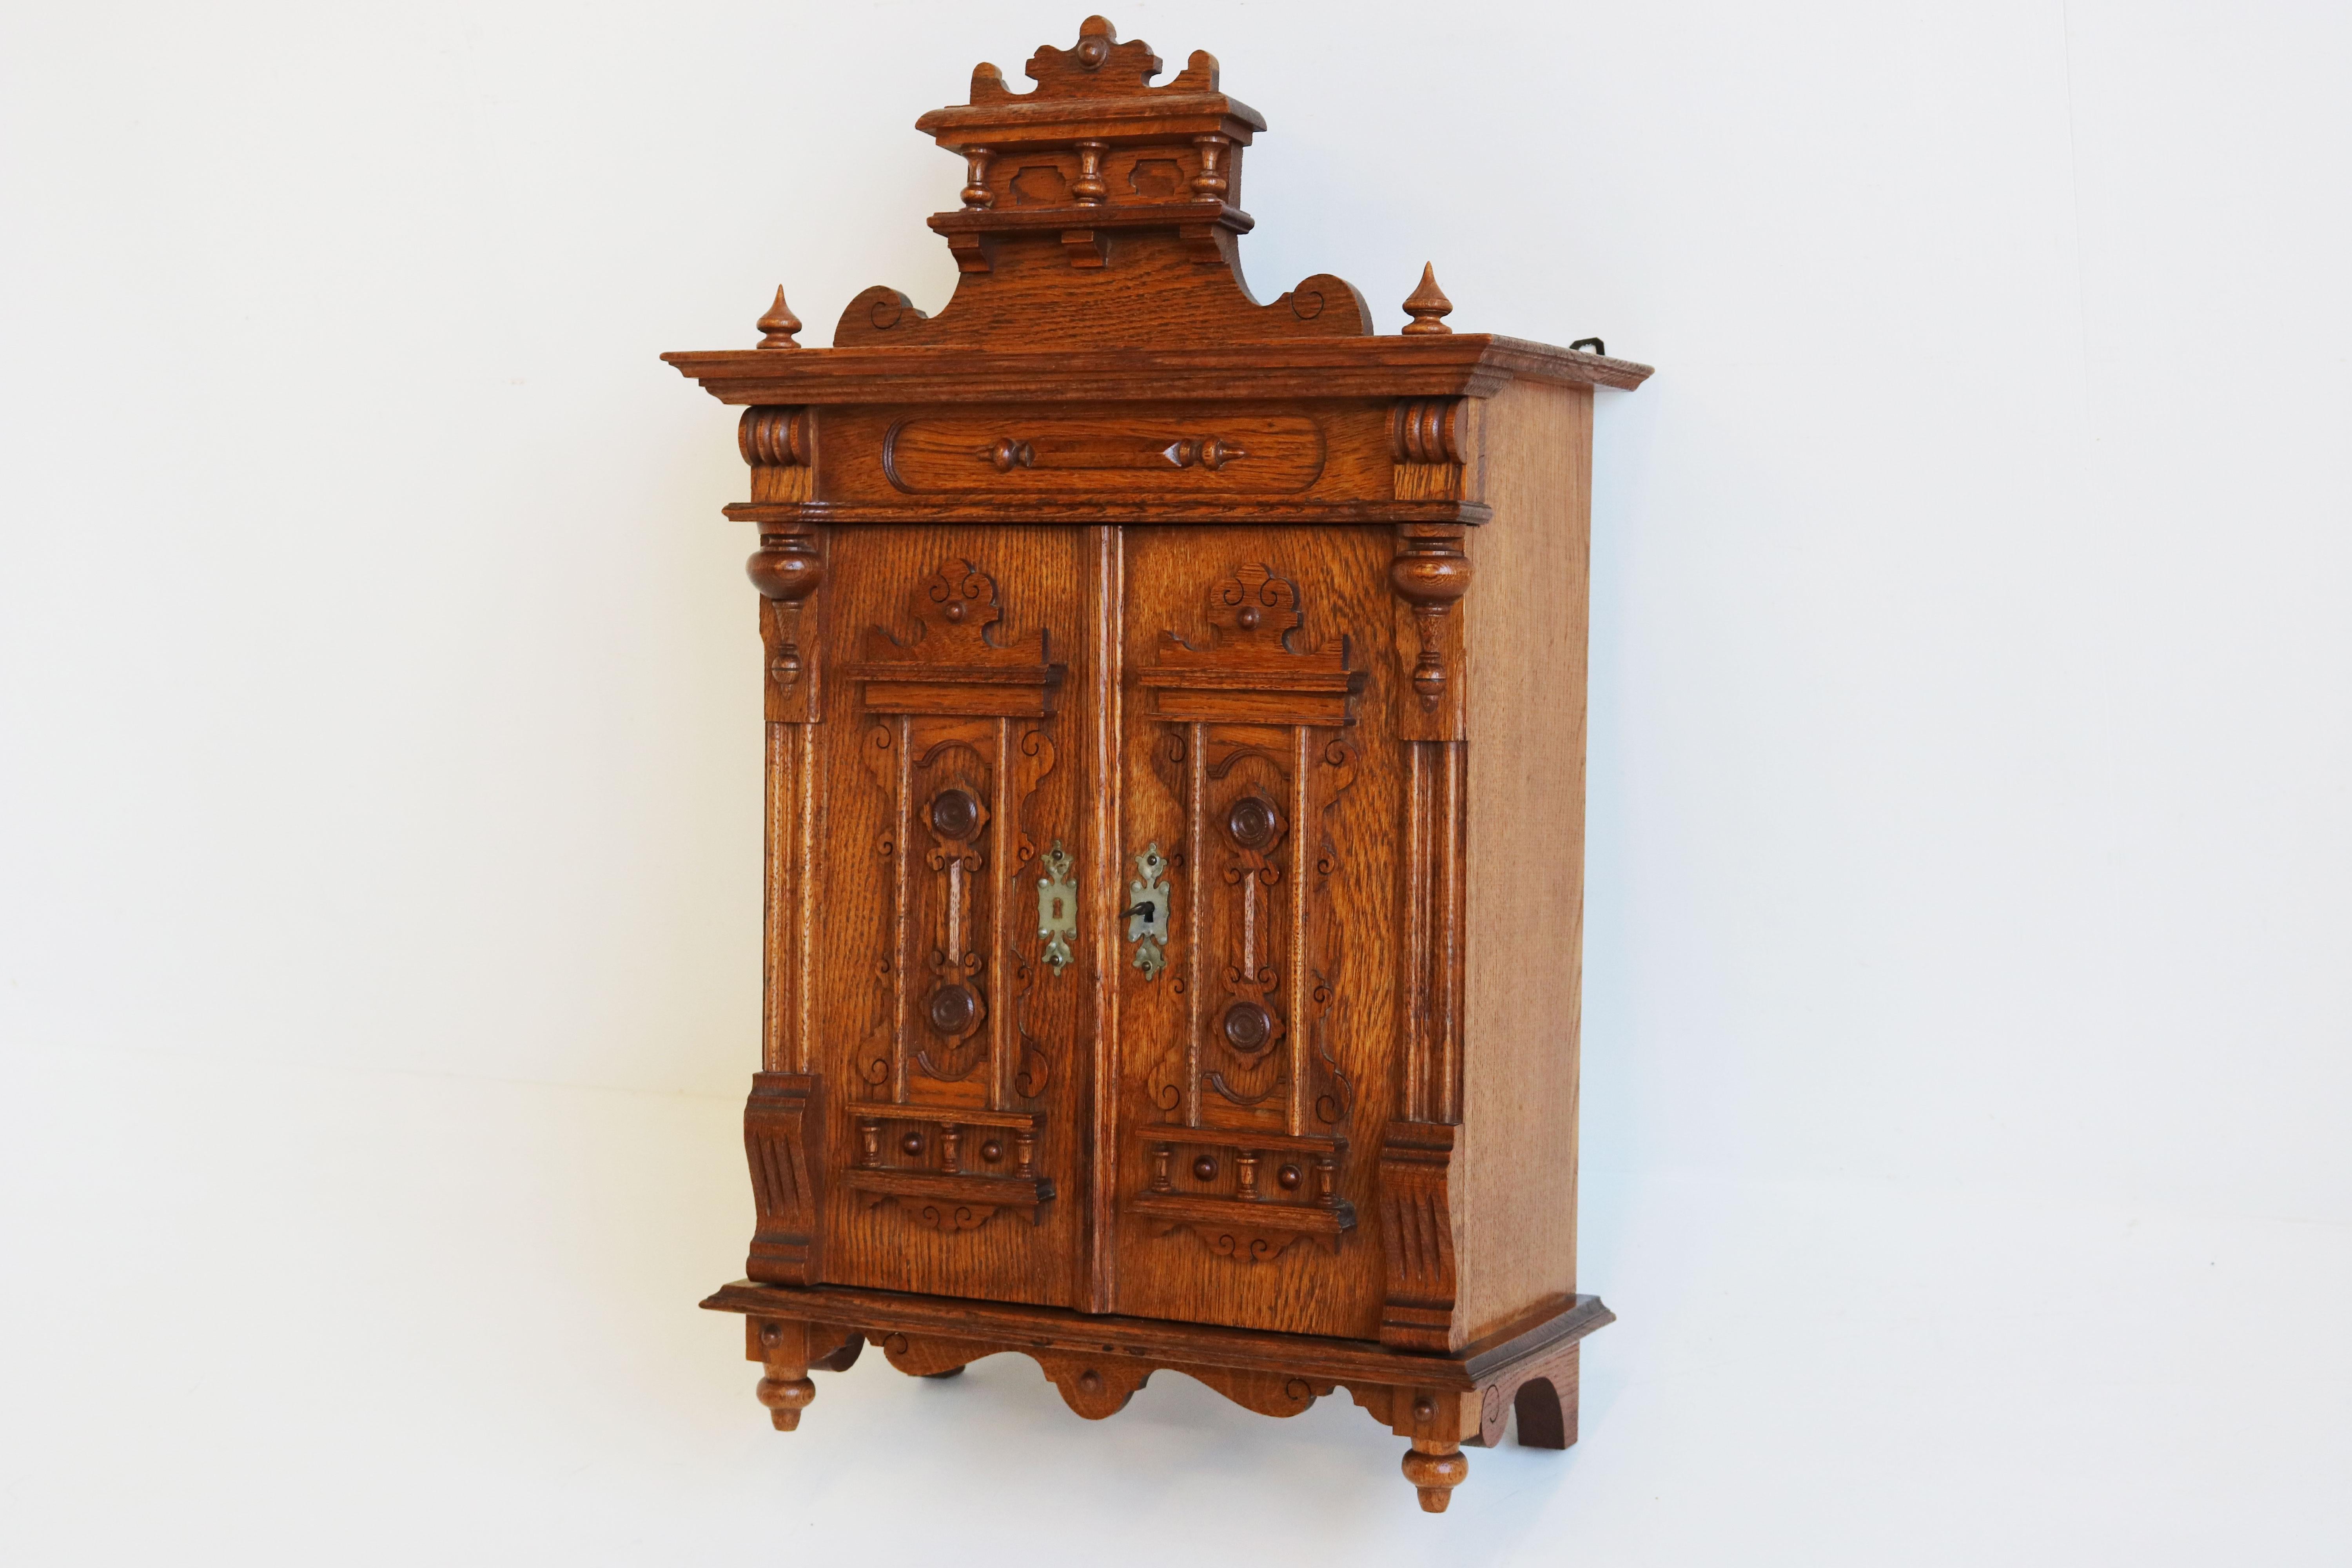 Neoclassical Revival Antique German 19th Century Gründerzeit Wall Cabinet Carved Oak Neo Classical For Sale